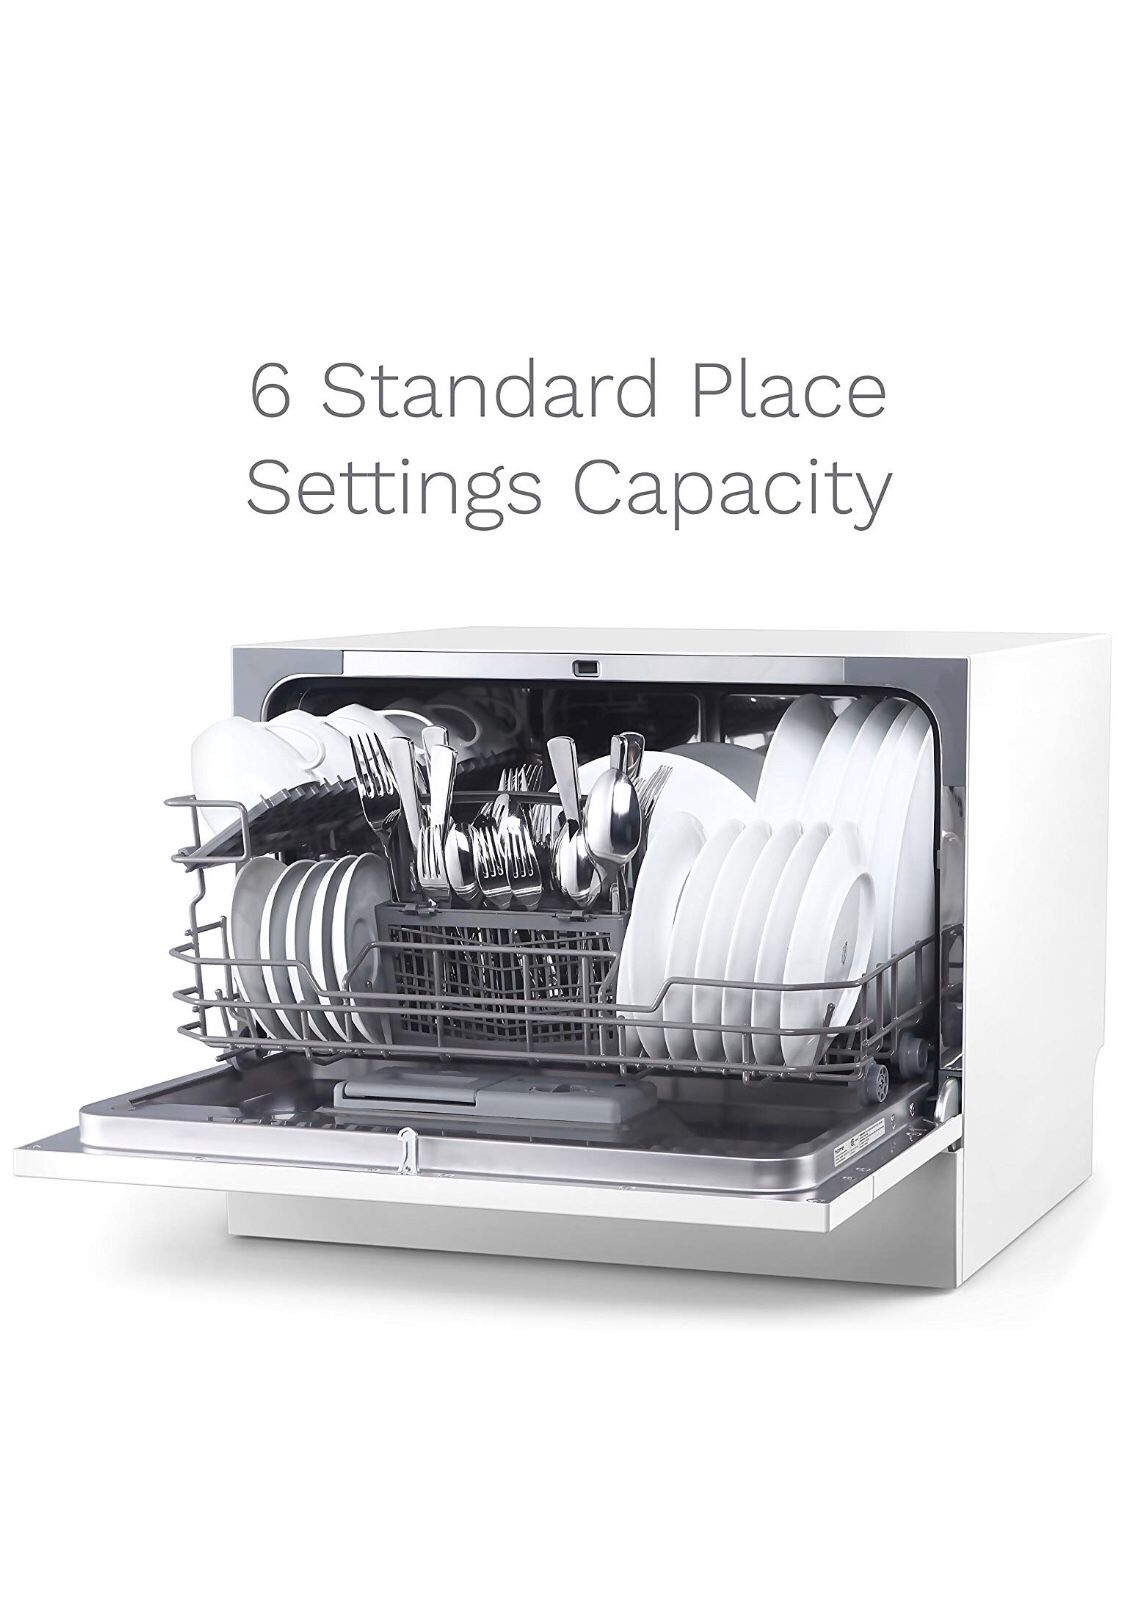 Brand New hOmeLabs Compact Countertop Dishwasher